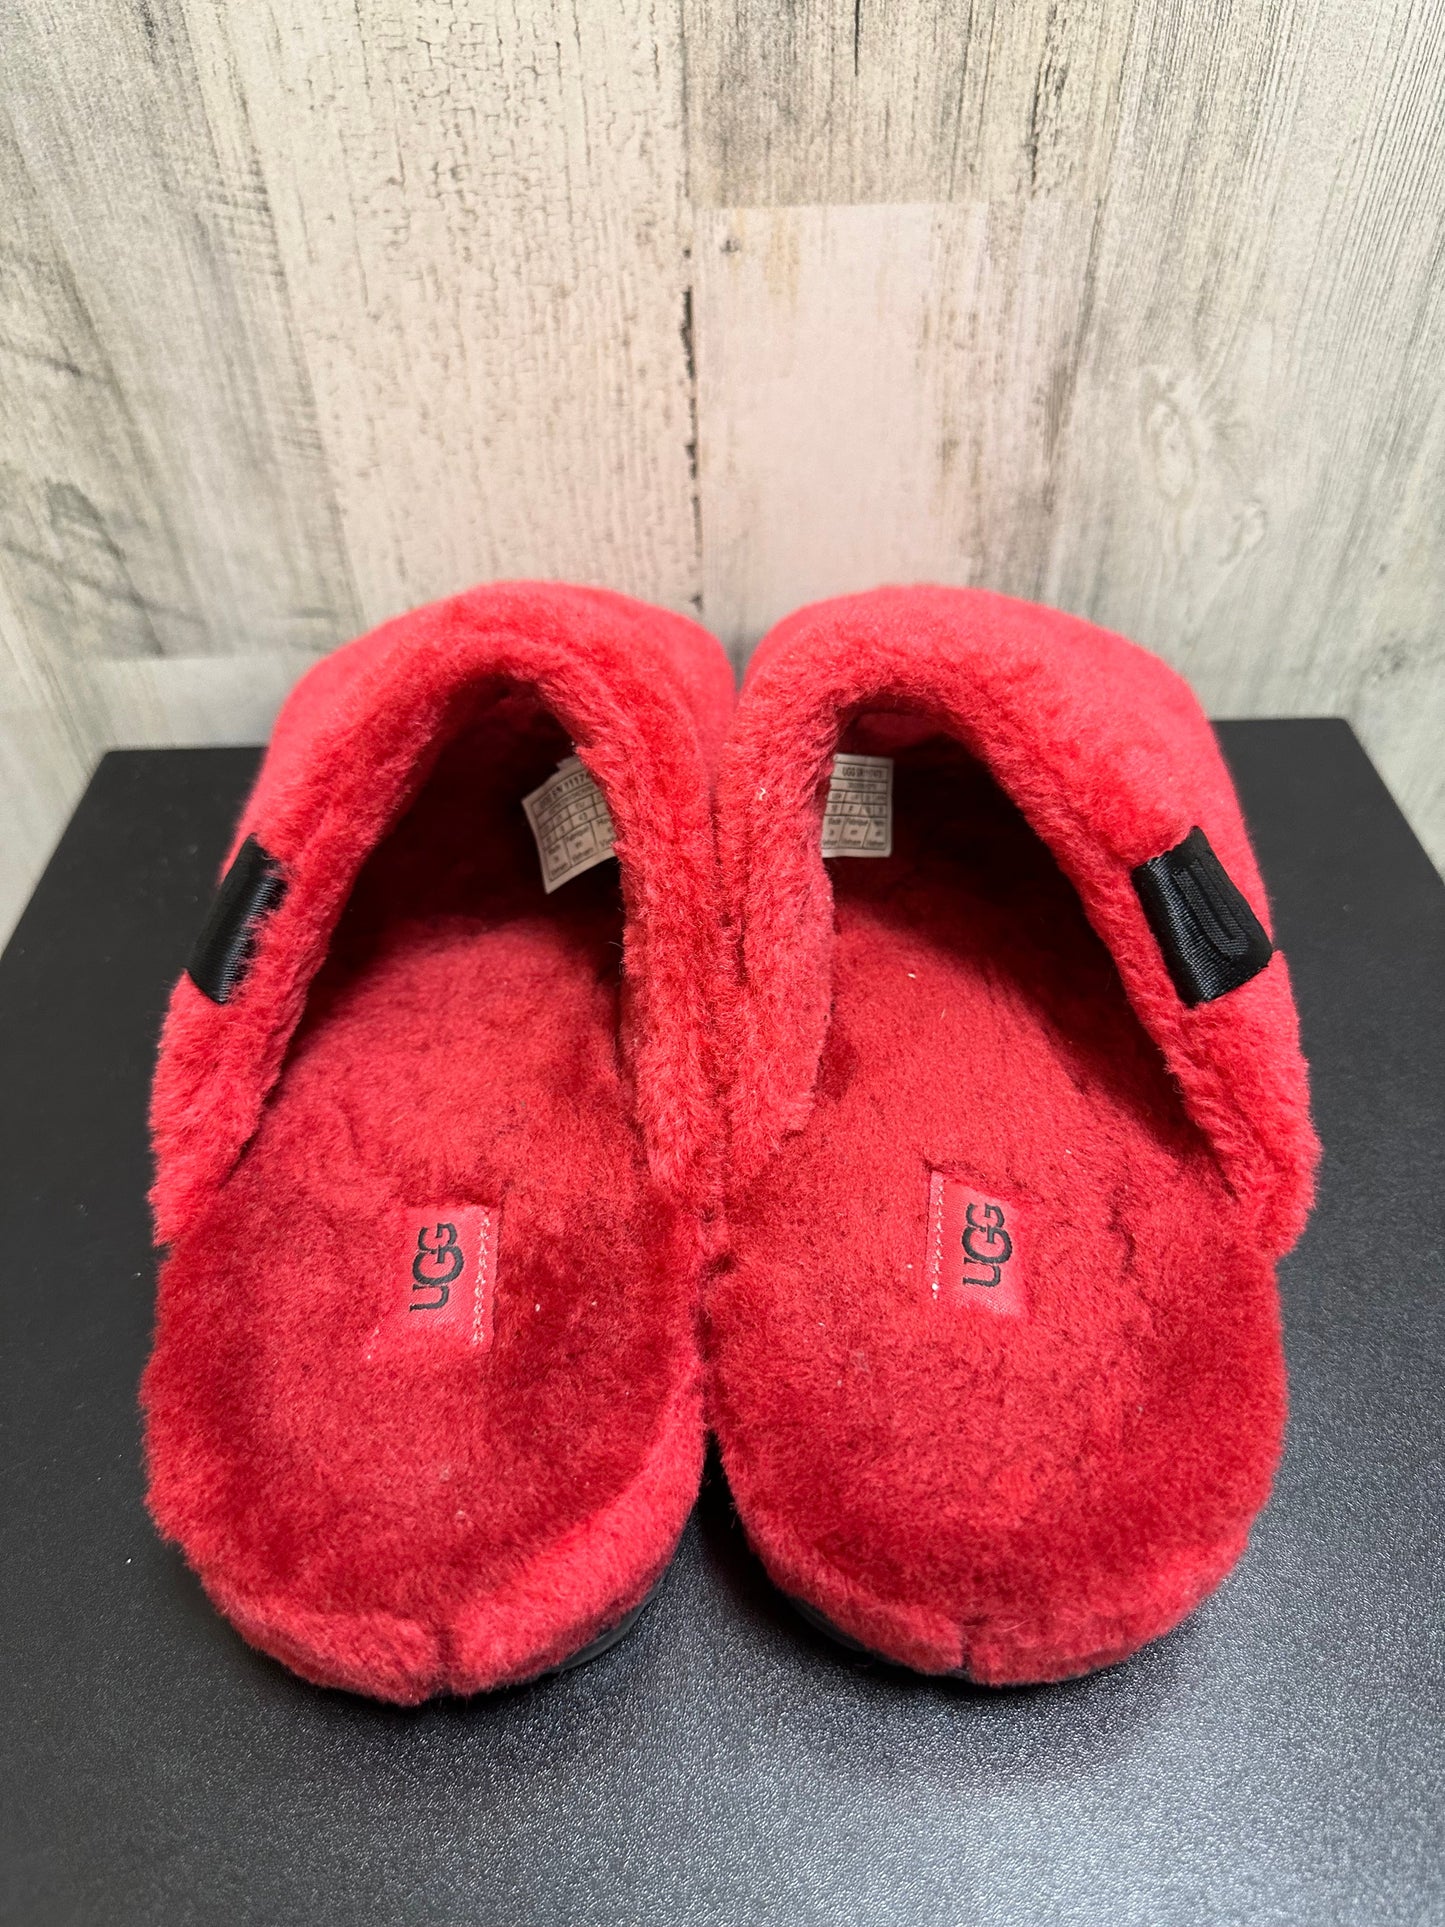 Red Shoes Flats Ugg, Size 10